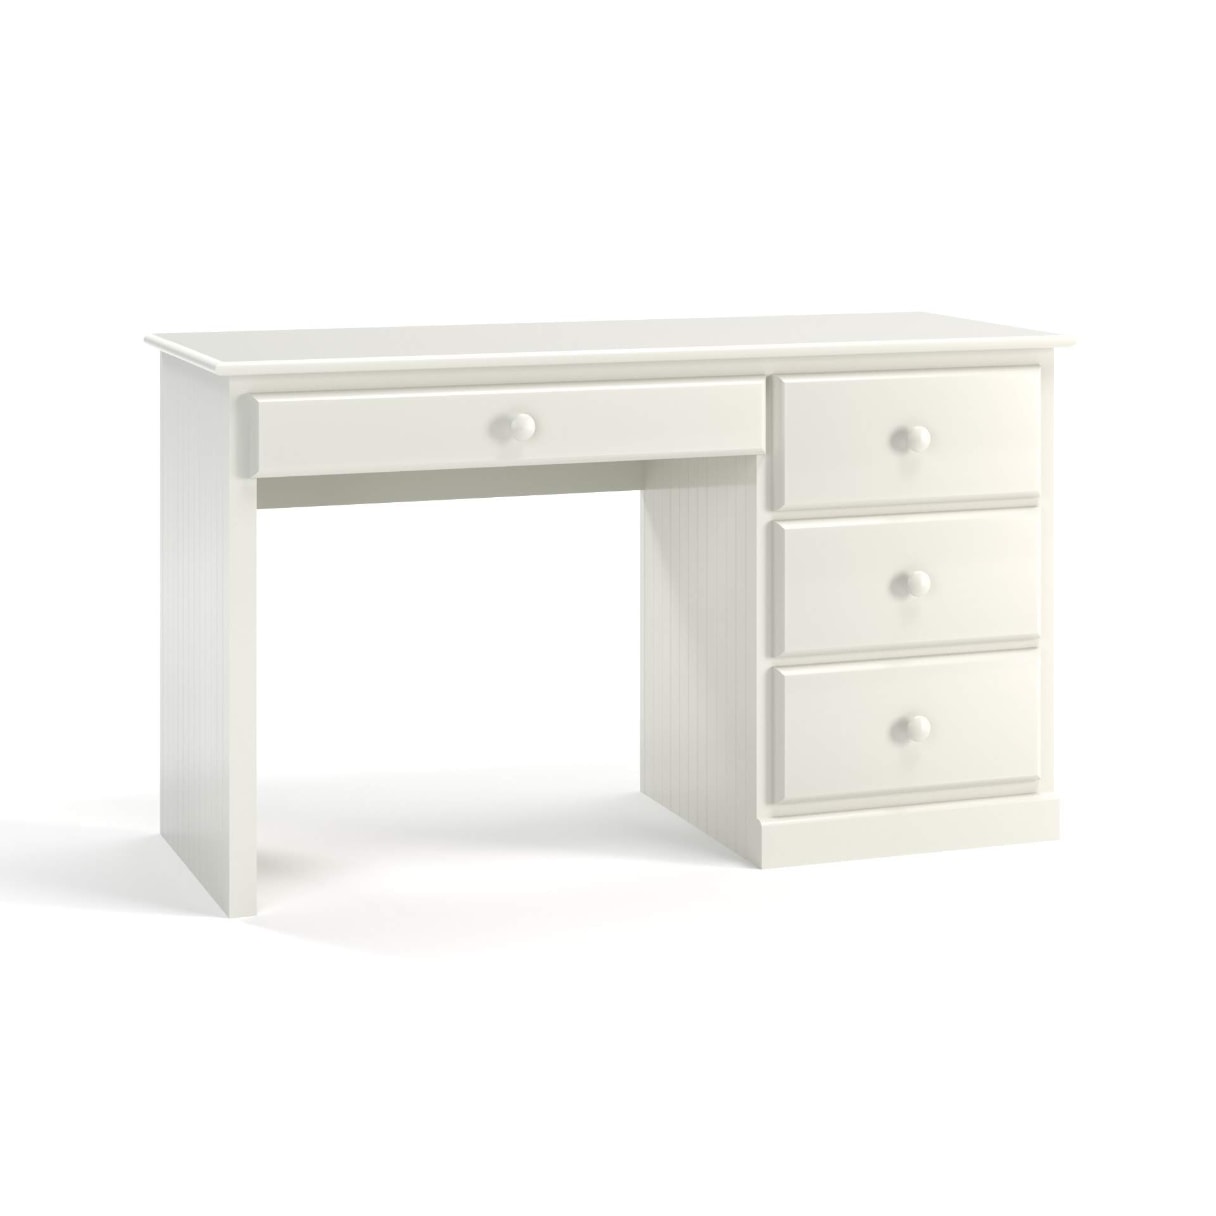 Acadia Cottage Student Desk with one wide shelf and 3 narrow shelves. Pictured in white.